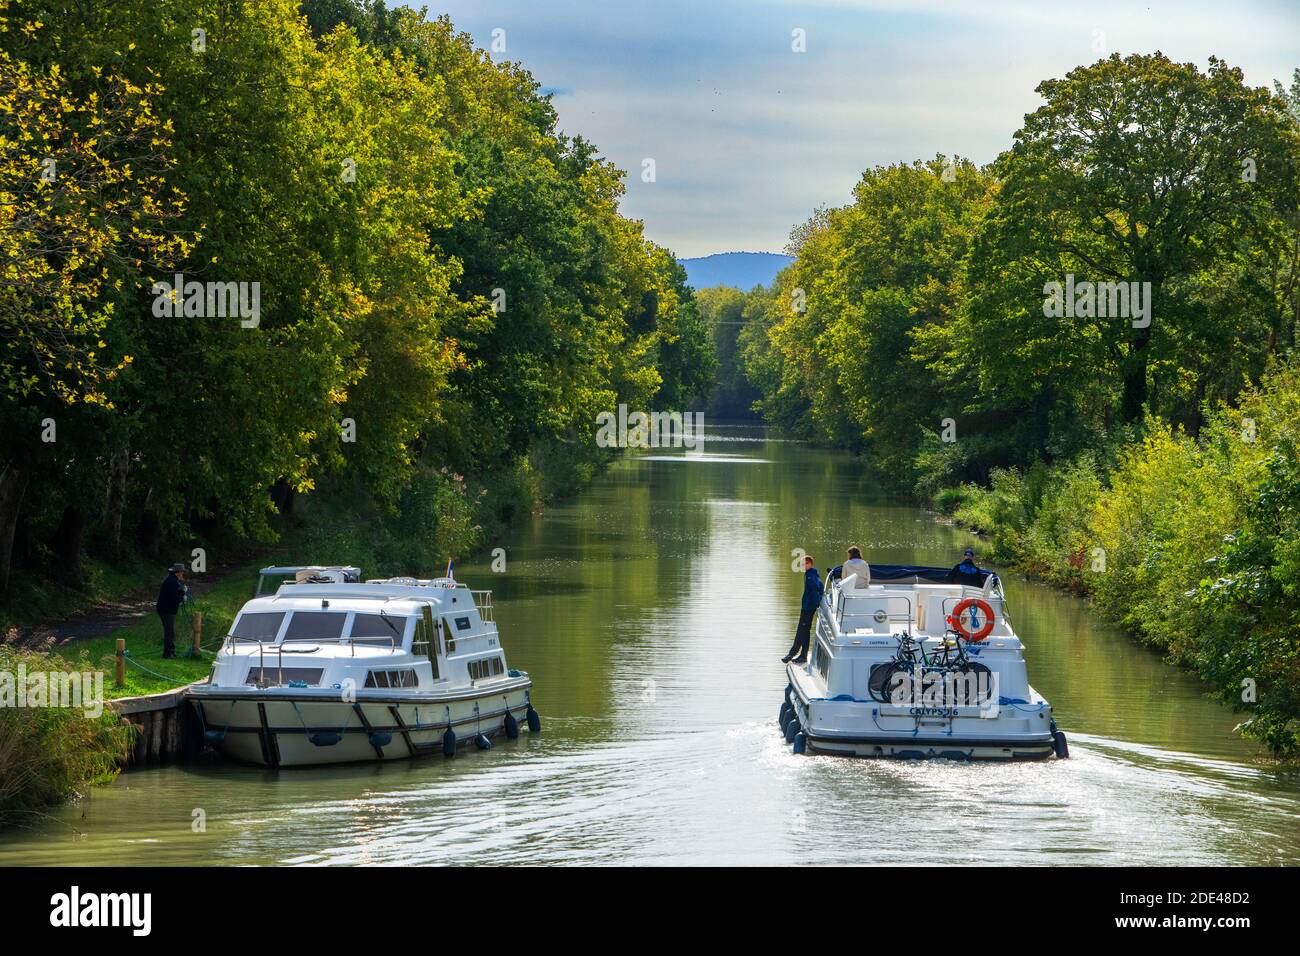 The Canal du Midi, near Carcassonne, French department of Aude, Occitanie Region, Languedoc-Rousillon France. Boats moored on the tree lined canal.  T Stock Photo